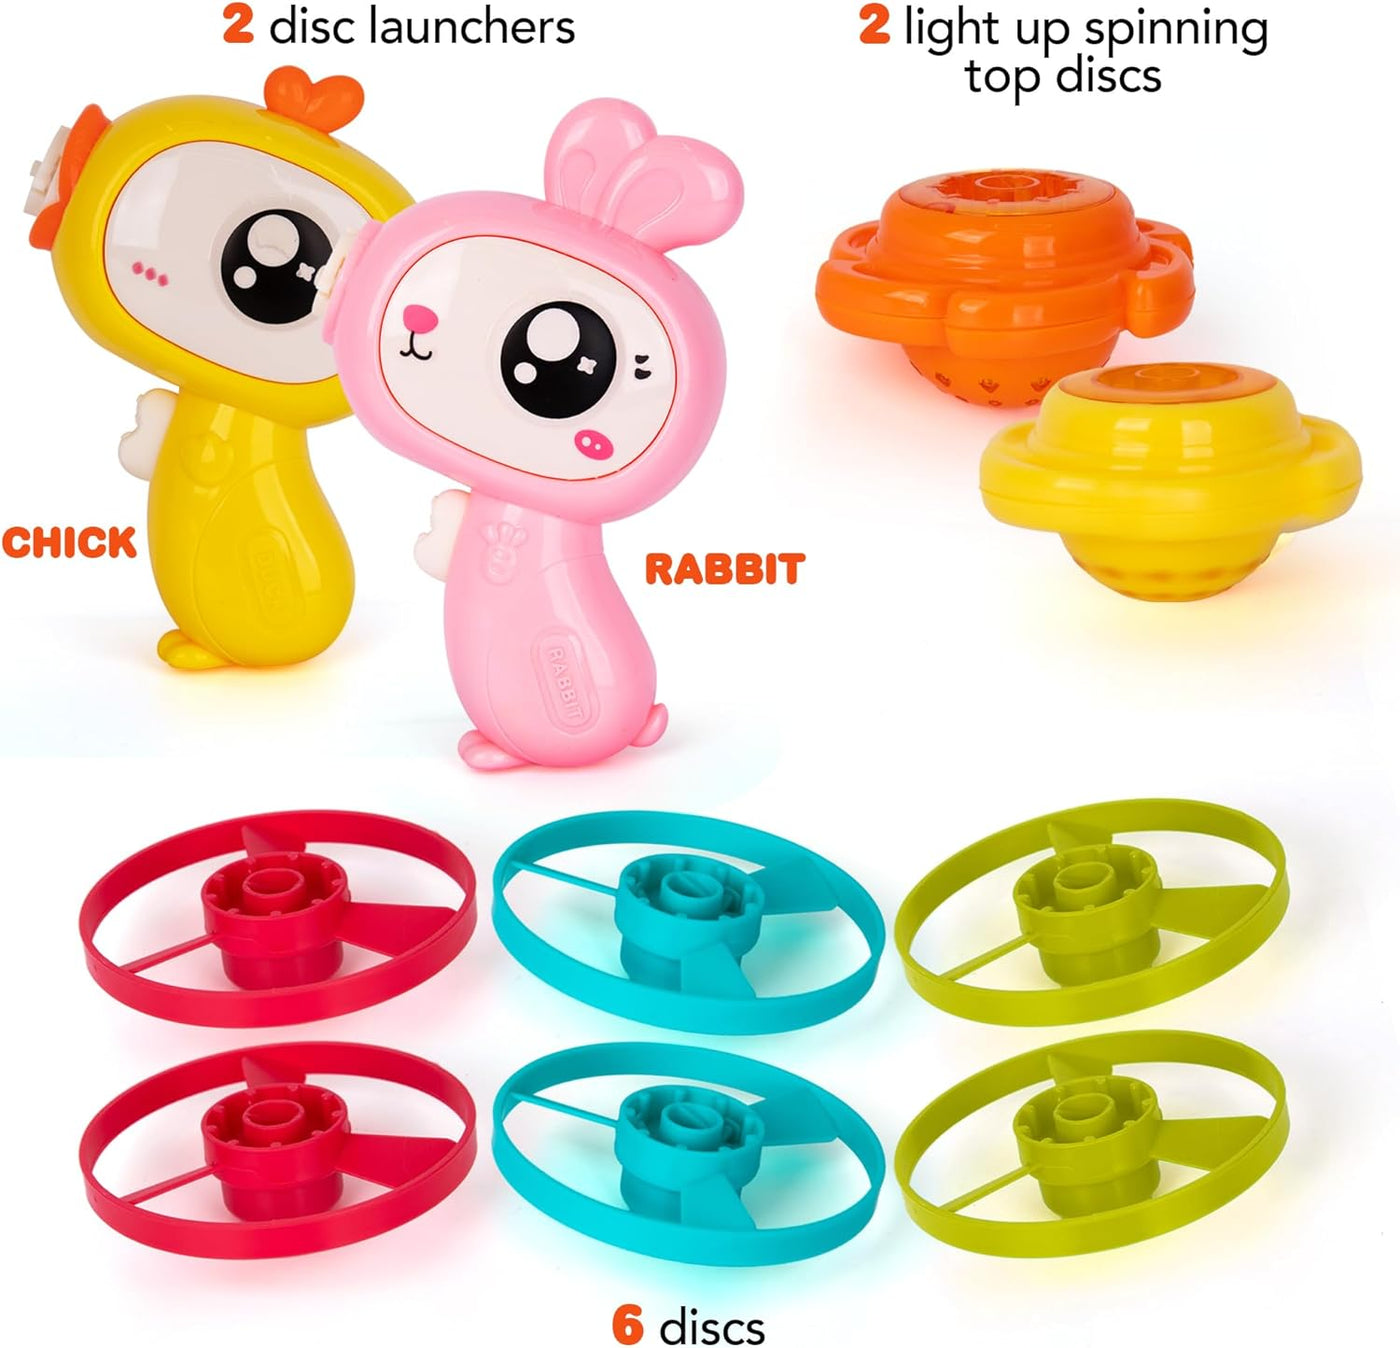 ArtCreativity Flying Disc Shooter Toys - Set of 2 Disc Shooters - Light Up Disk Shooters for Kids with 4 Disks Each - Cute Chick and Rabbit Design - Shooter Toys for Kids - Gifts for Ages 3 4 5